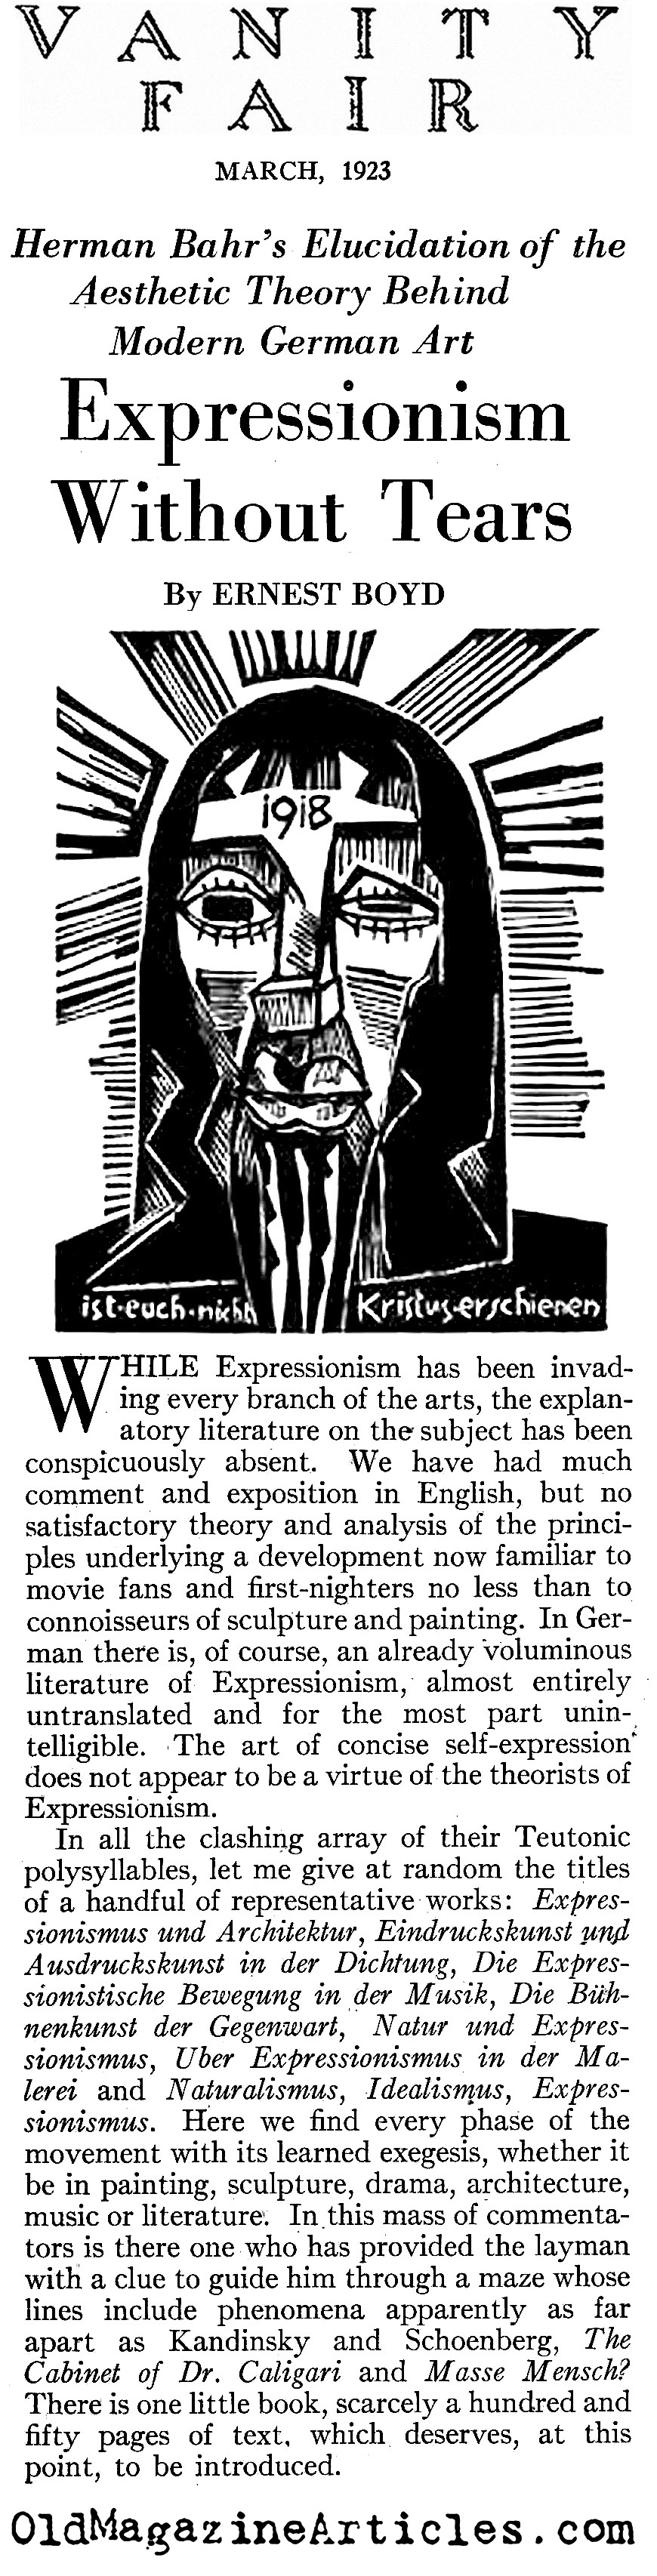 Expressionism as Theory (Vanity Fair Magazine, 1923)